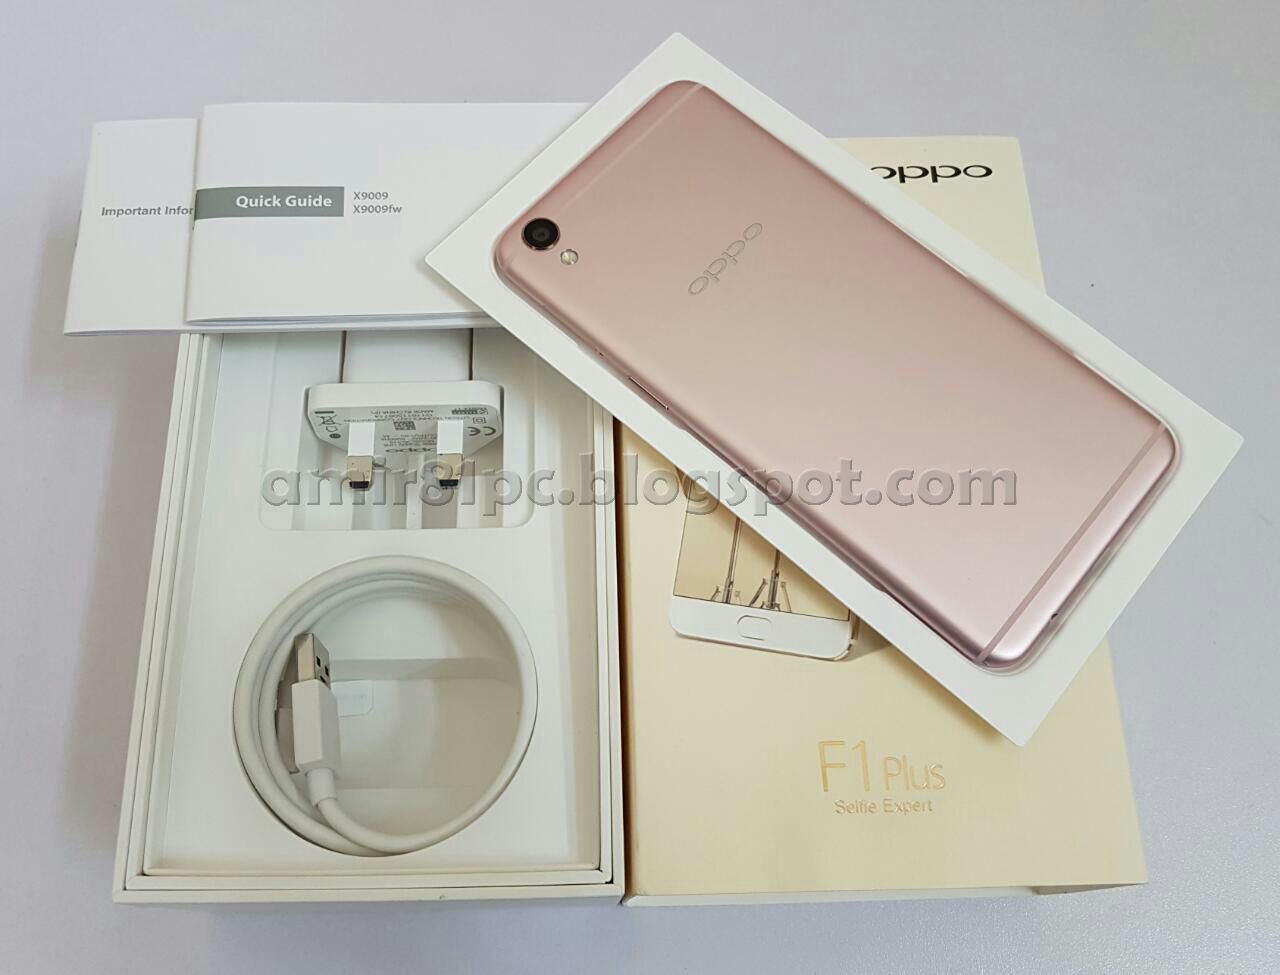 Three A Tech Computer Sales and Services: Oppo F1 Plus 